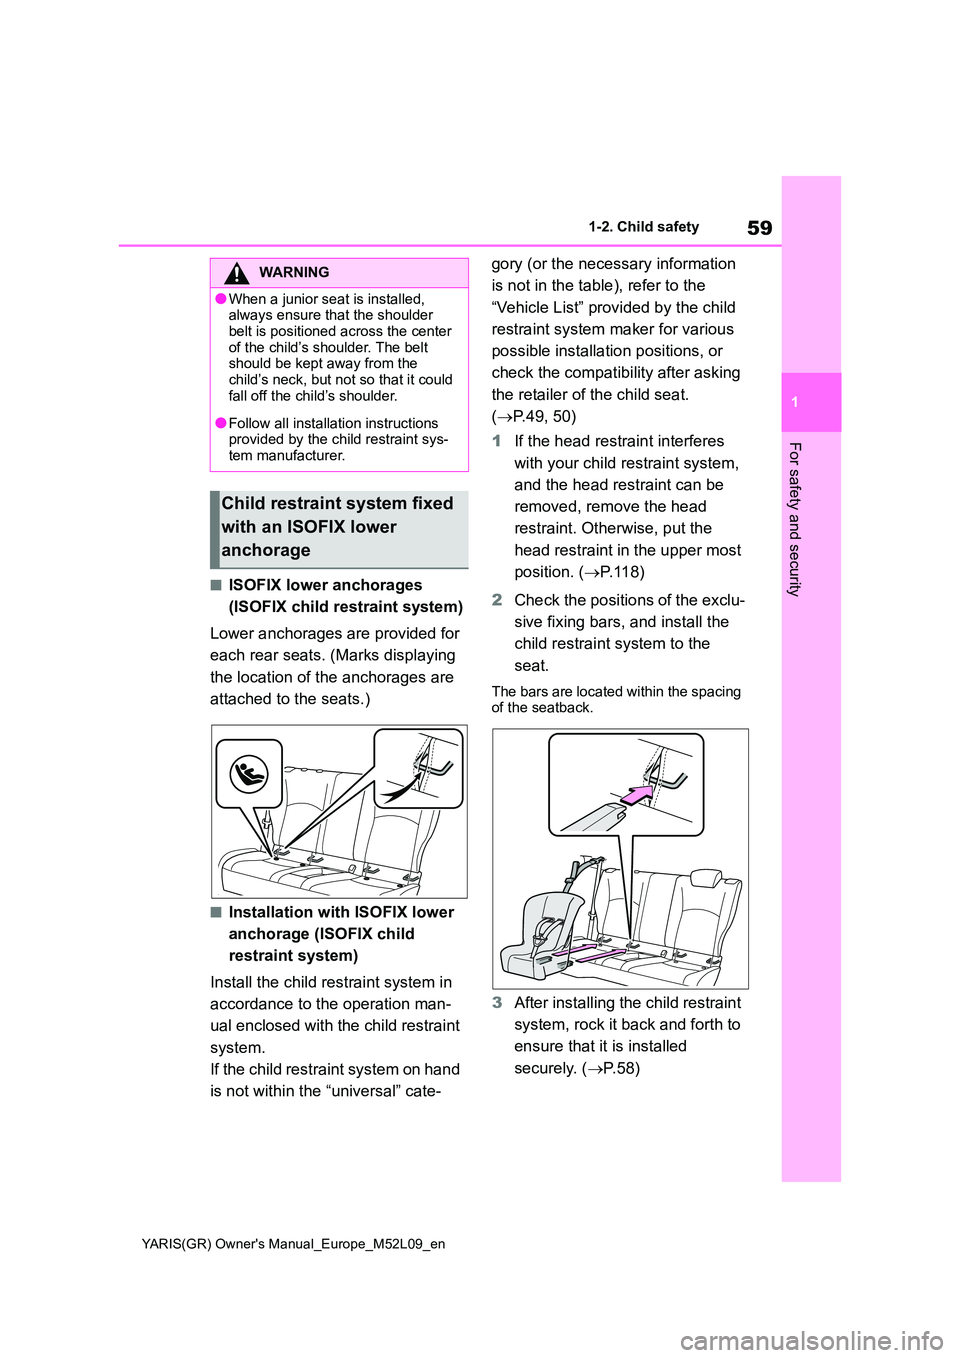 TOYOTA GR YARIS 2020  Owners Manual 59
1
YARIS(GR) Owners Manual_Europe_M52L09_en
1-2. Child safety
For safety and security
■ISOFIX lower anchorages  
(ISOFIX child restraint system) 
Lower anchorages are provided for  
each rear sea